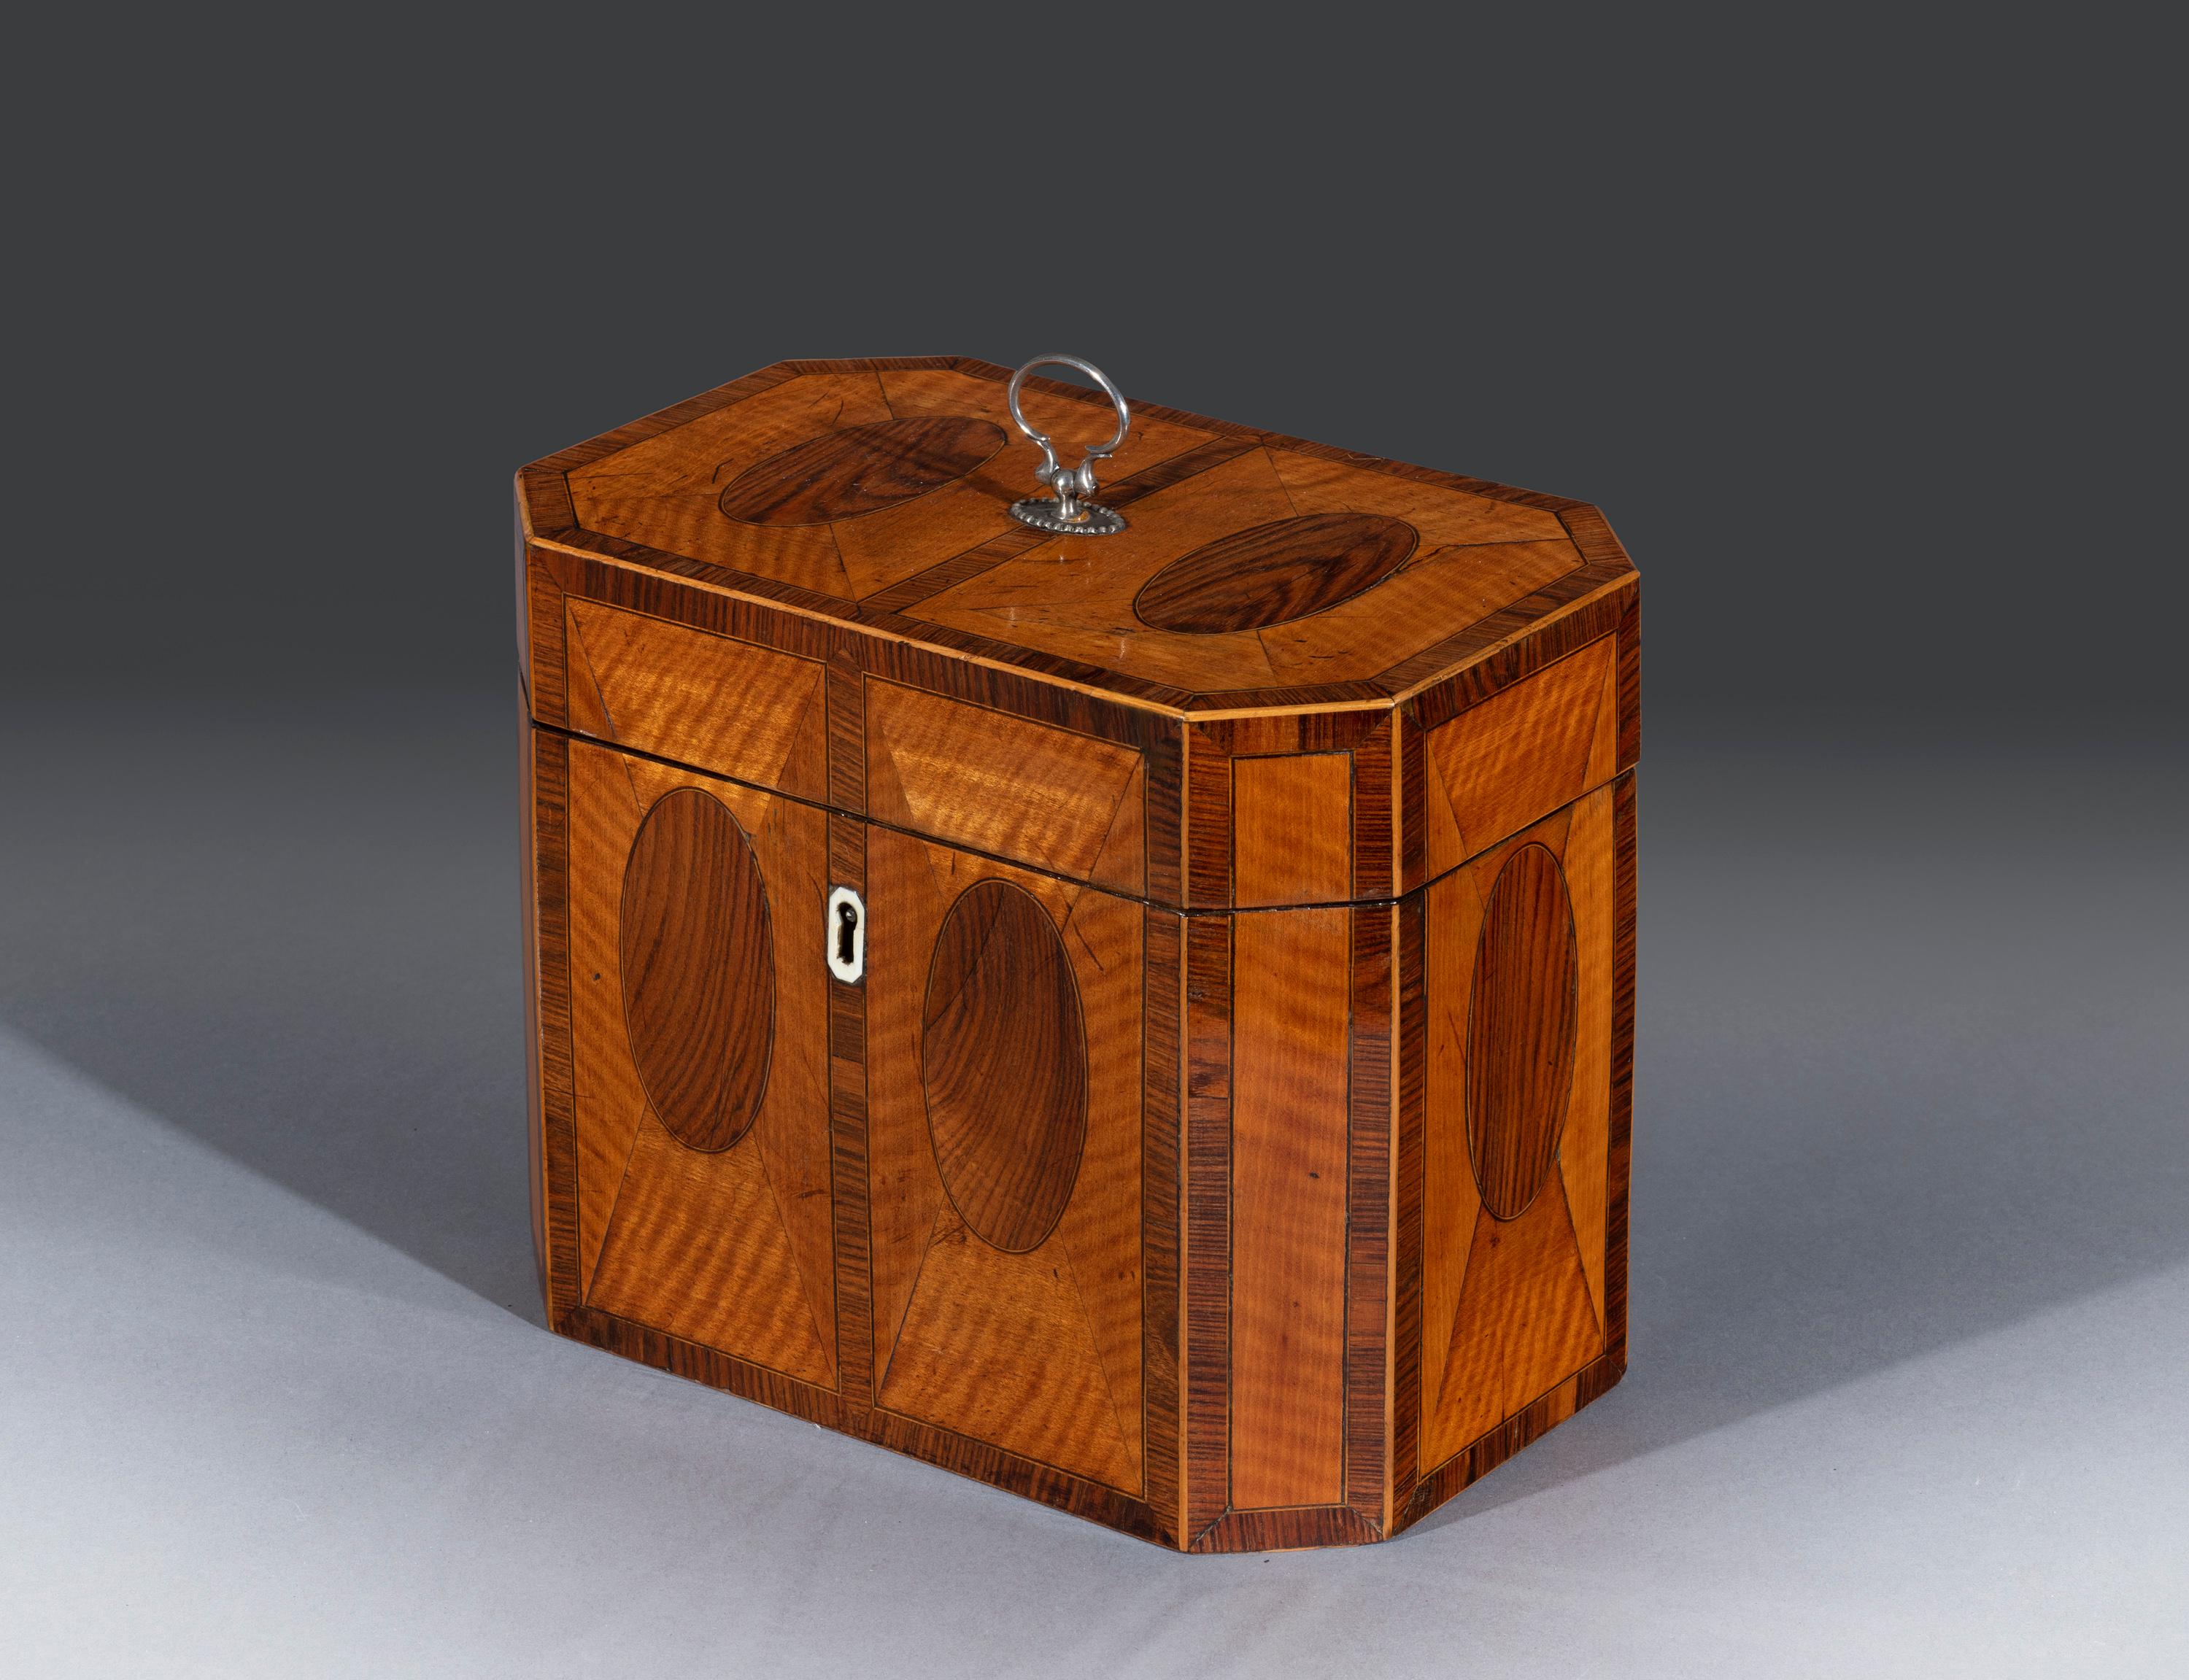 The West Indian satinwood caddy is fitted with the original silver handle and is inlaid with padouk and crossbanded and inset with oval panels throughout. The hinged top opens to reveal two glass tea canisters fitted with the original side caps. The